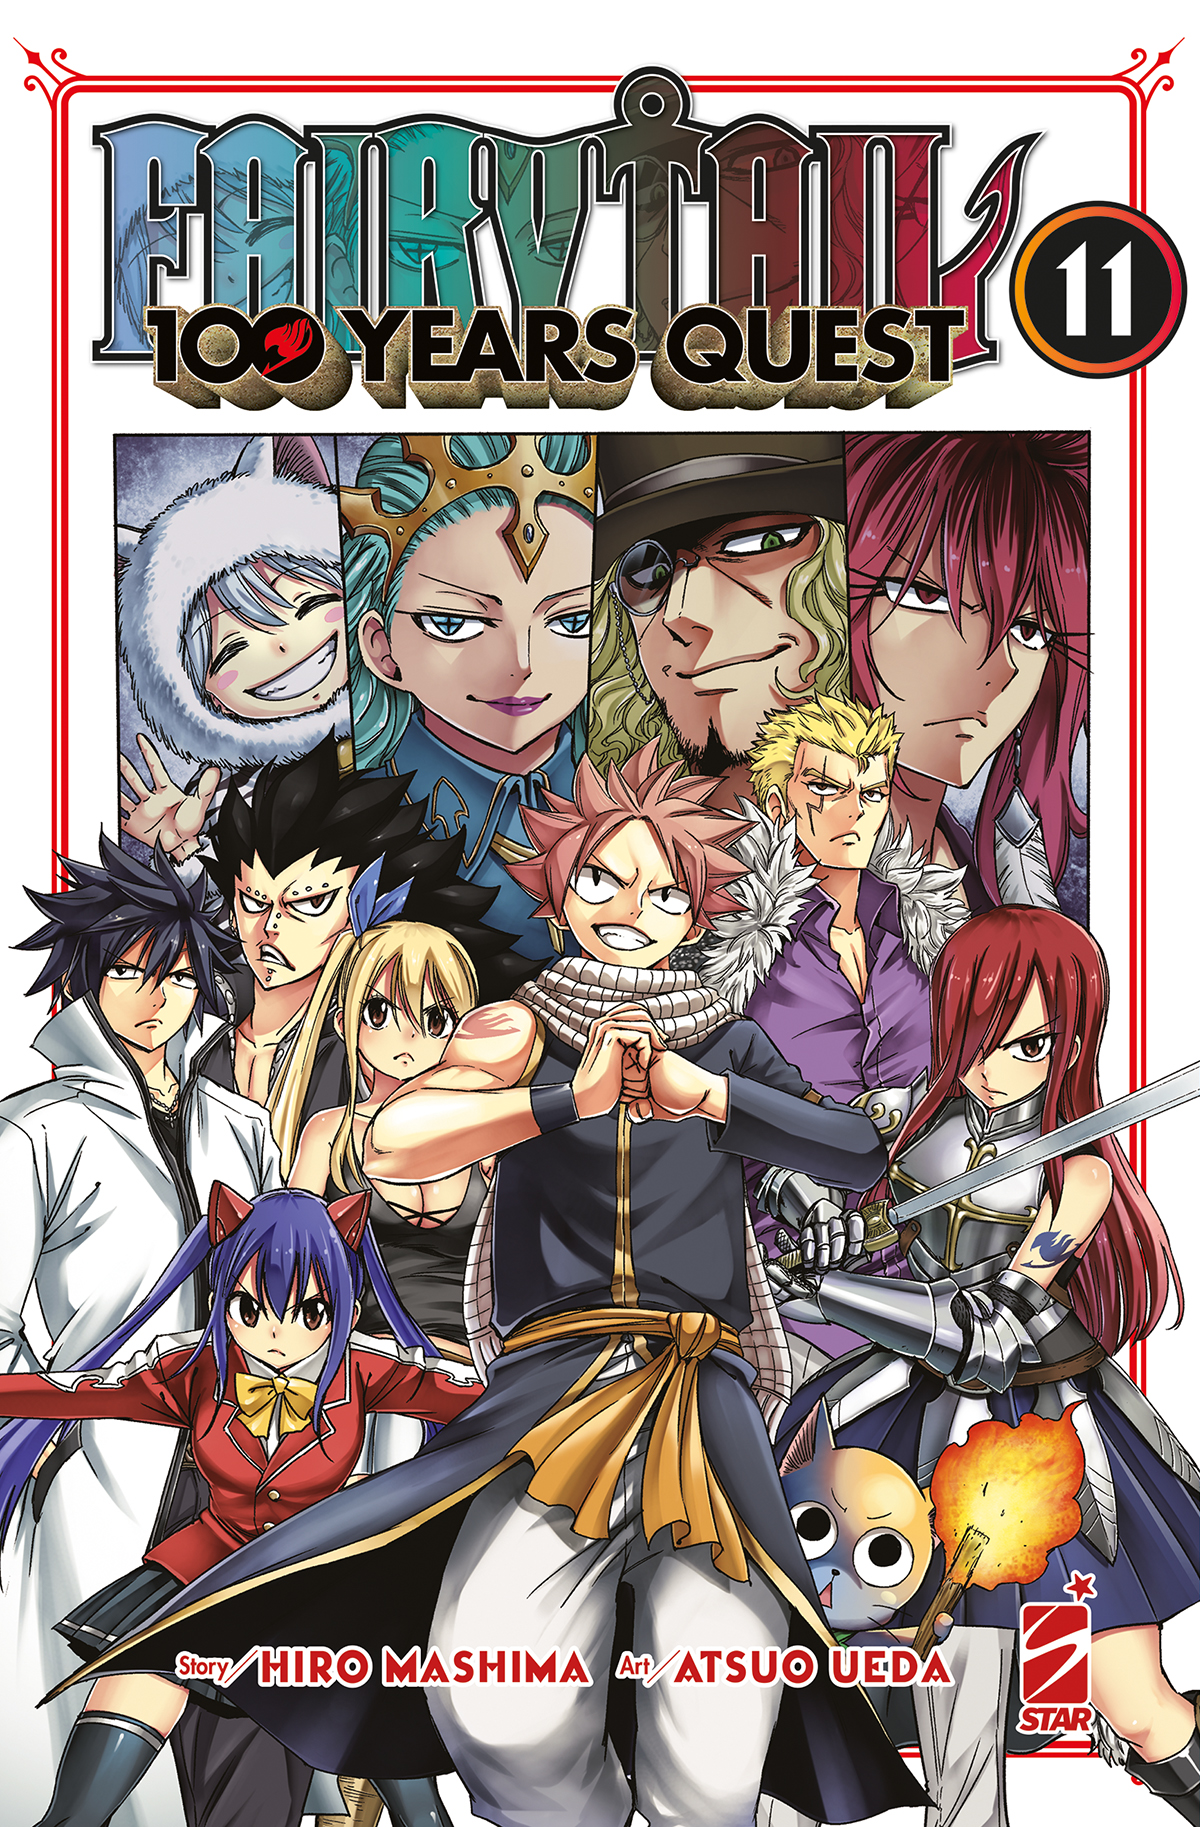 YOUNG #339 FAIRY TAIL 100 YEARS QUEST N.11